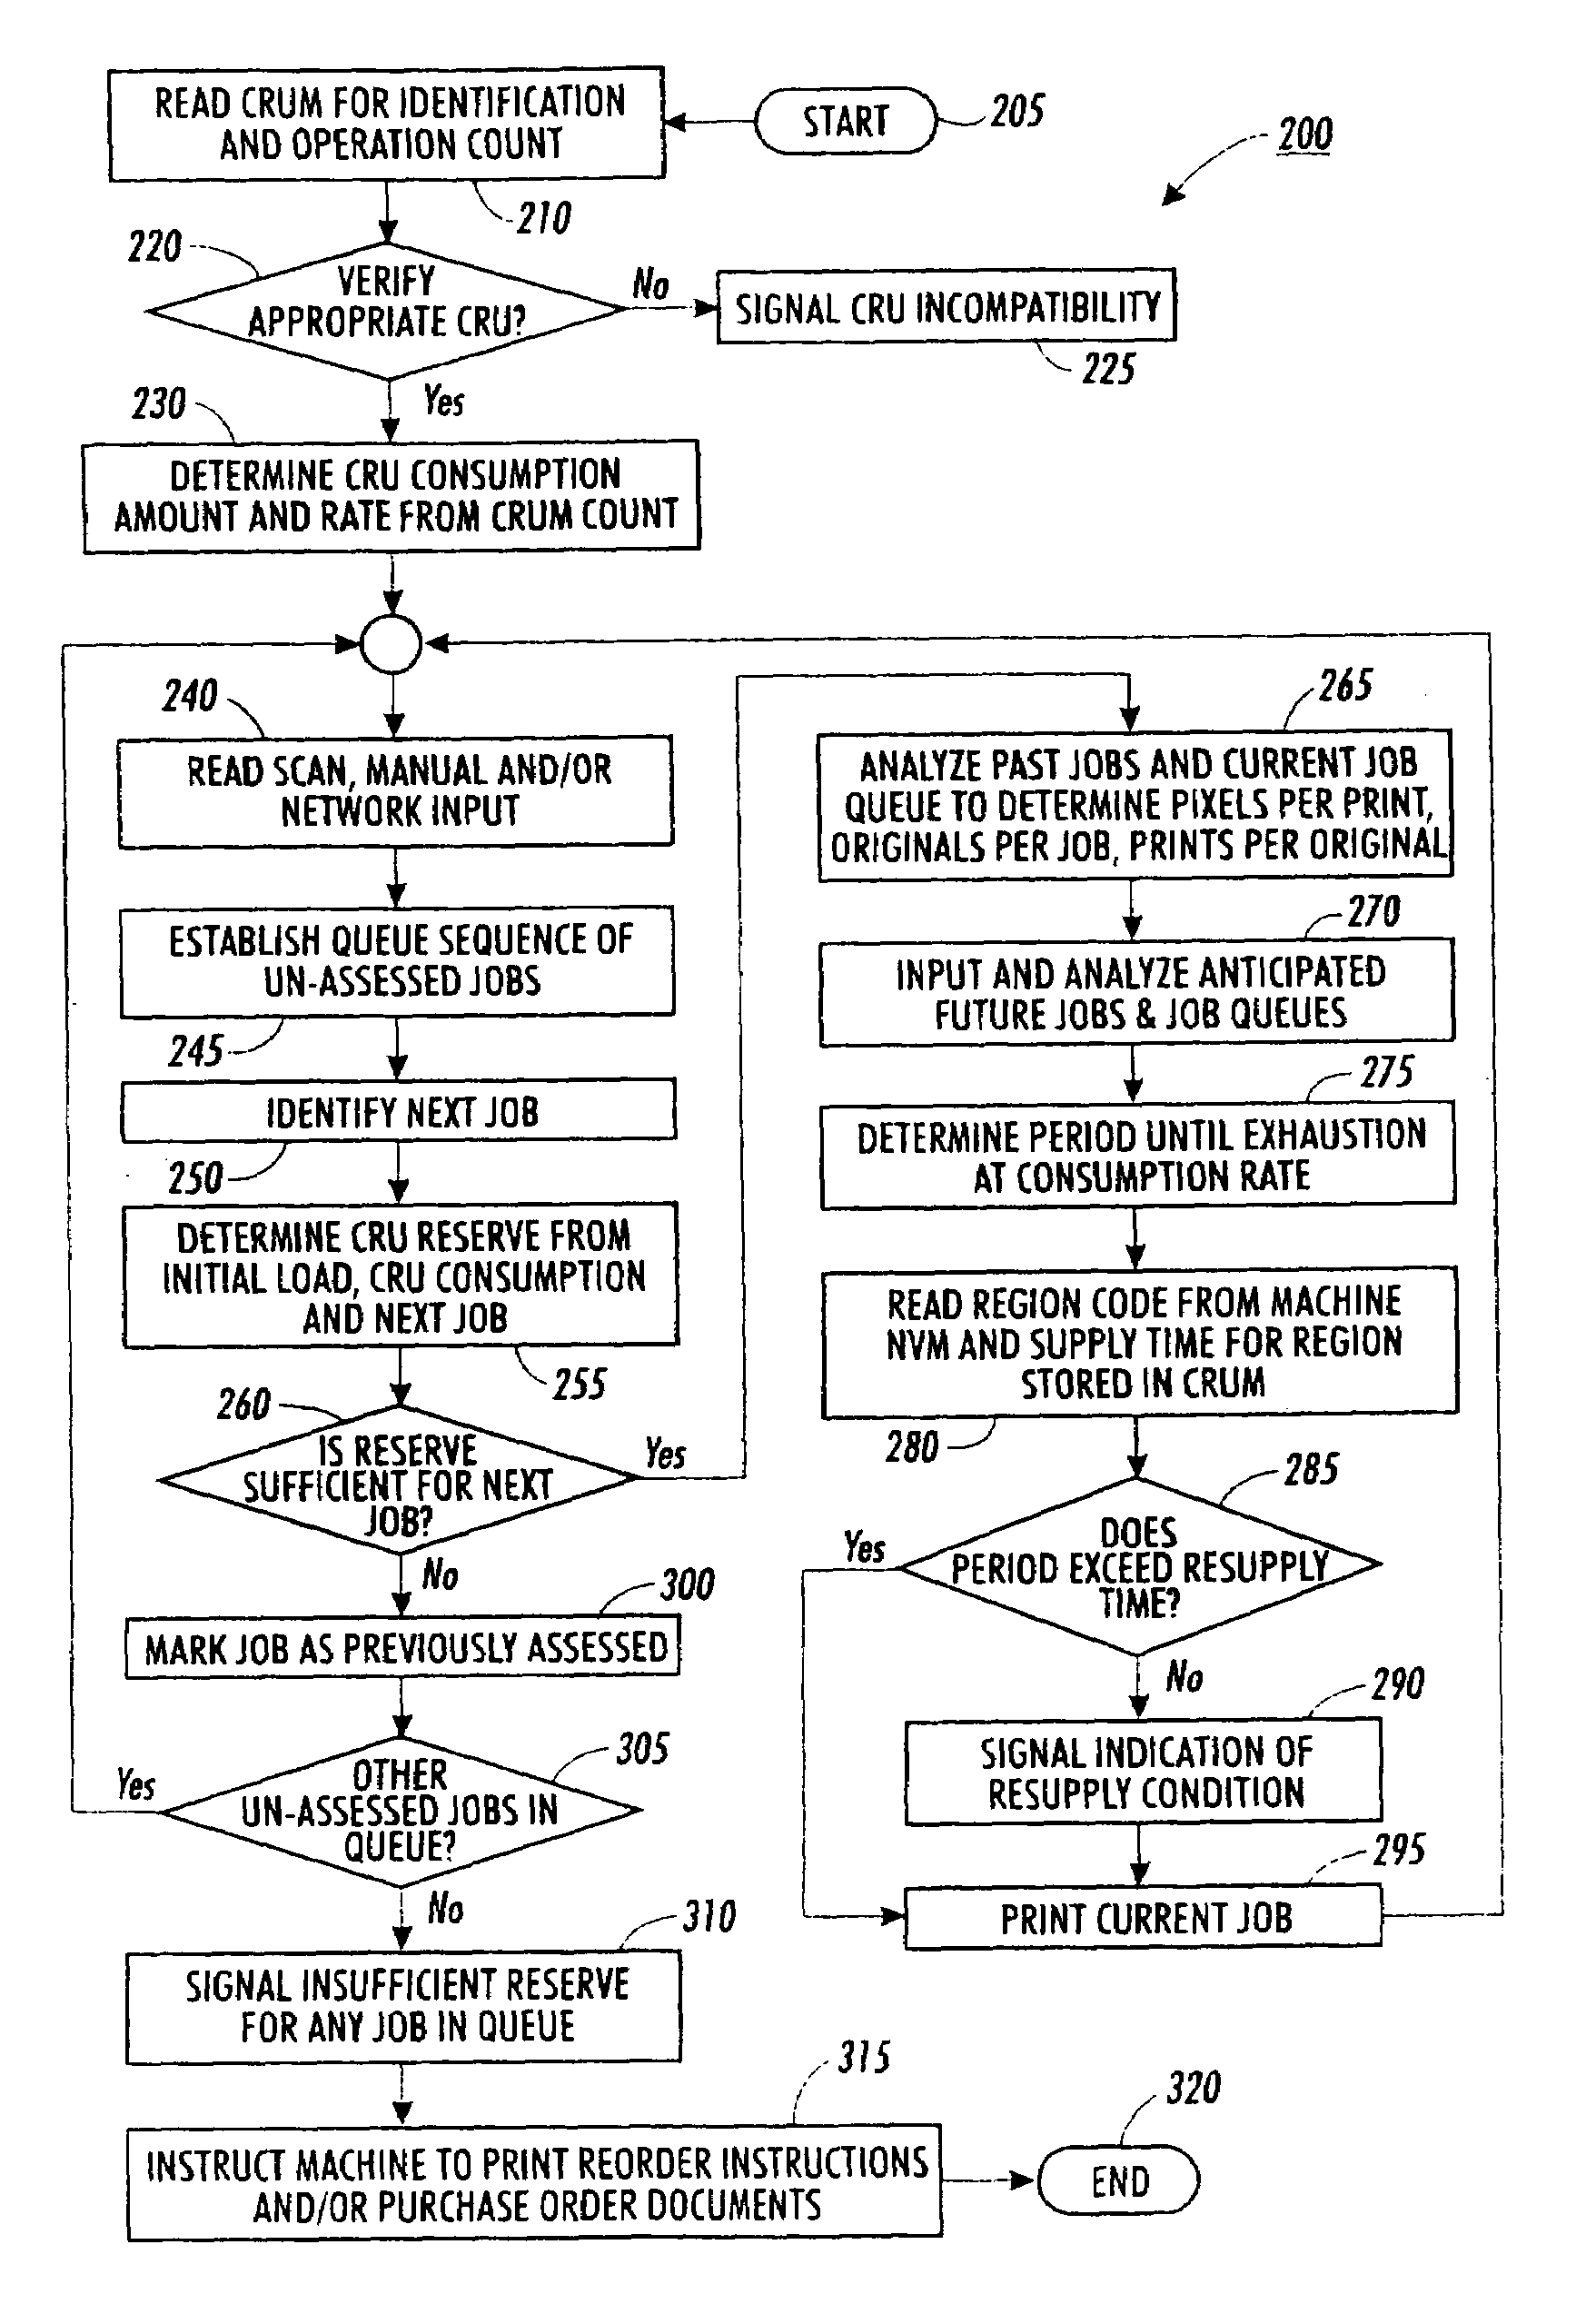 Systems and methods for end-of-life prediction